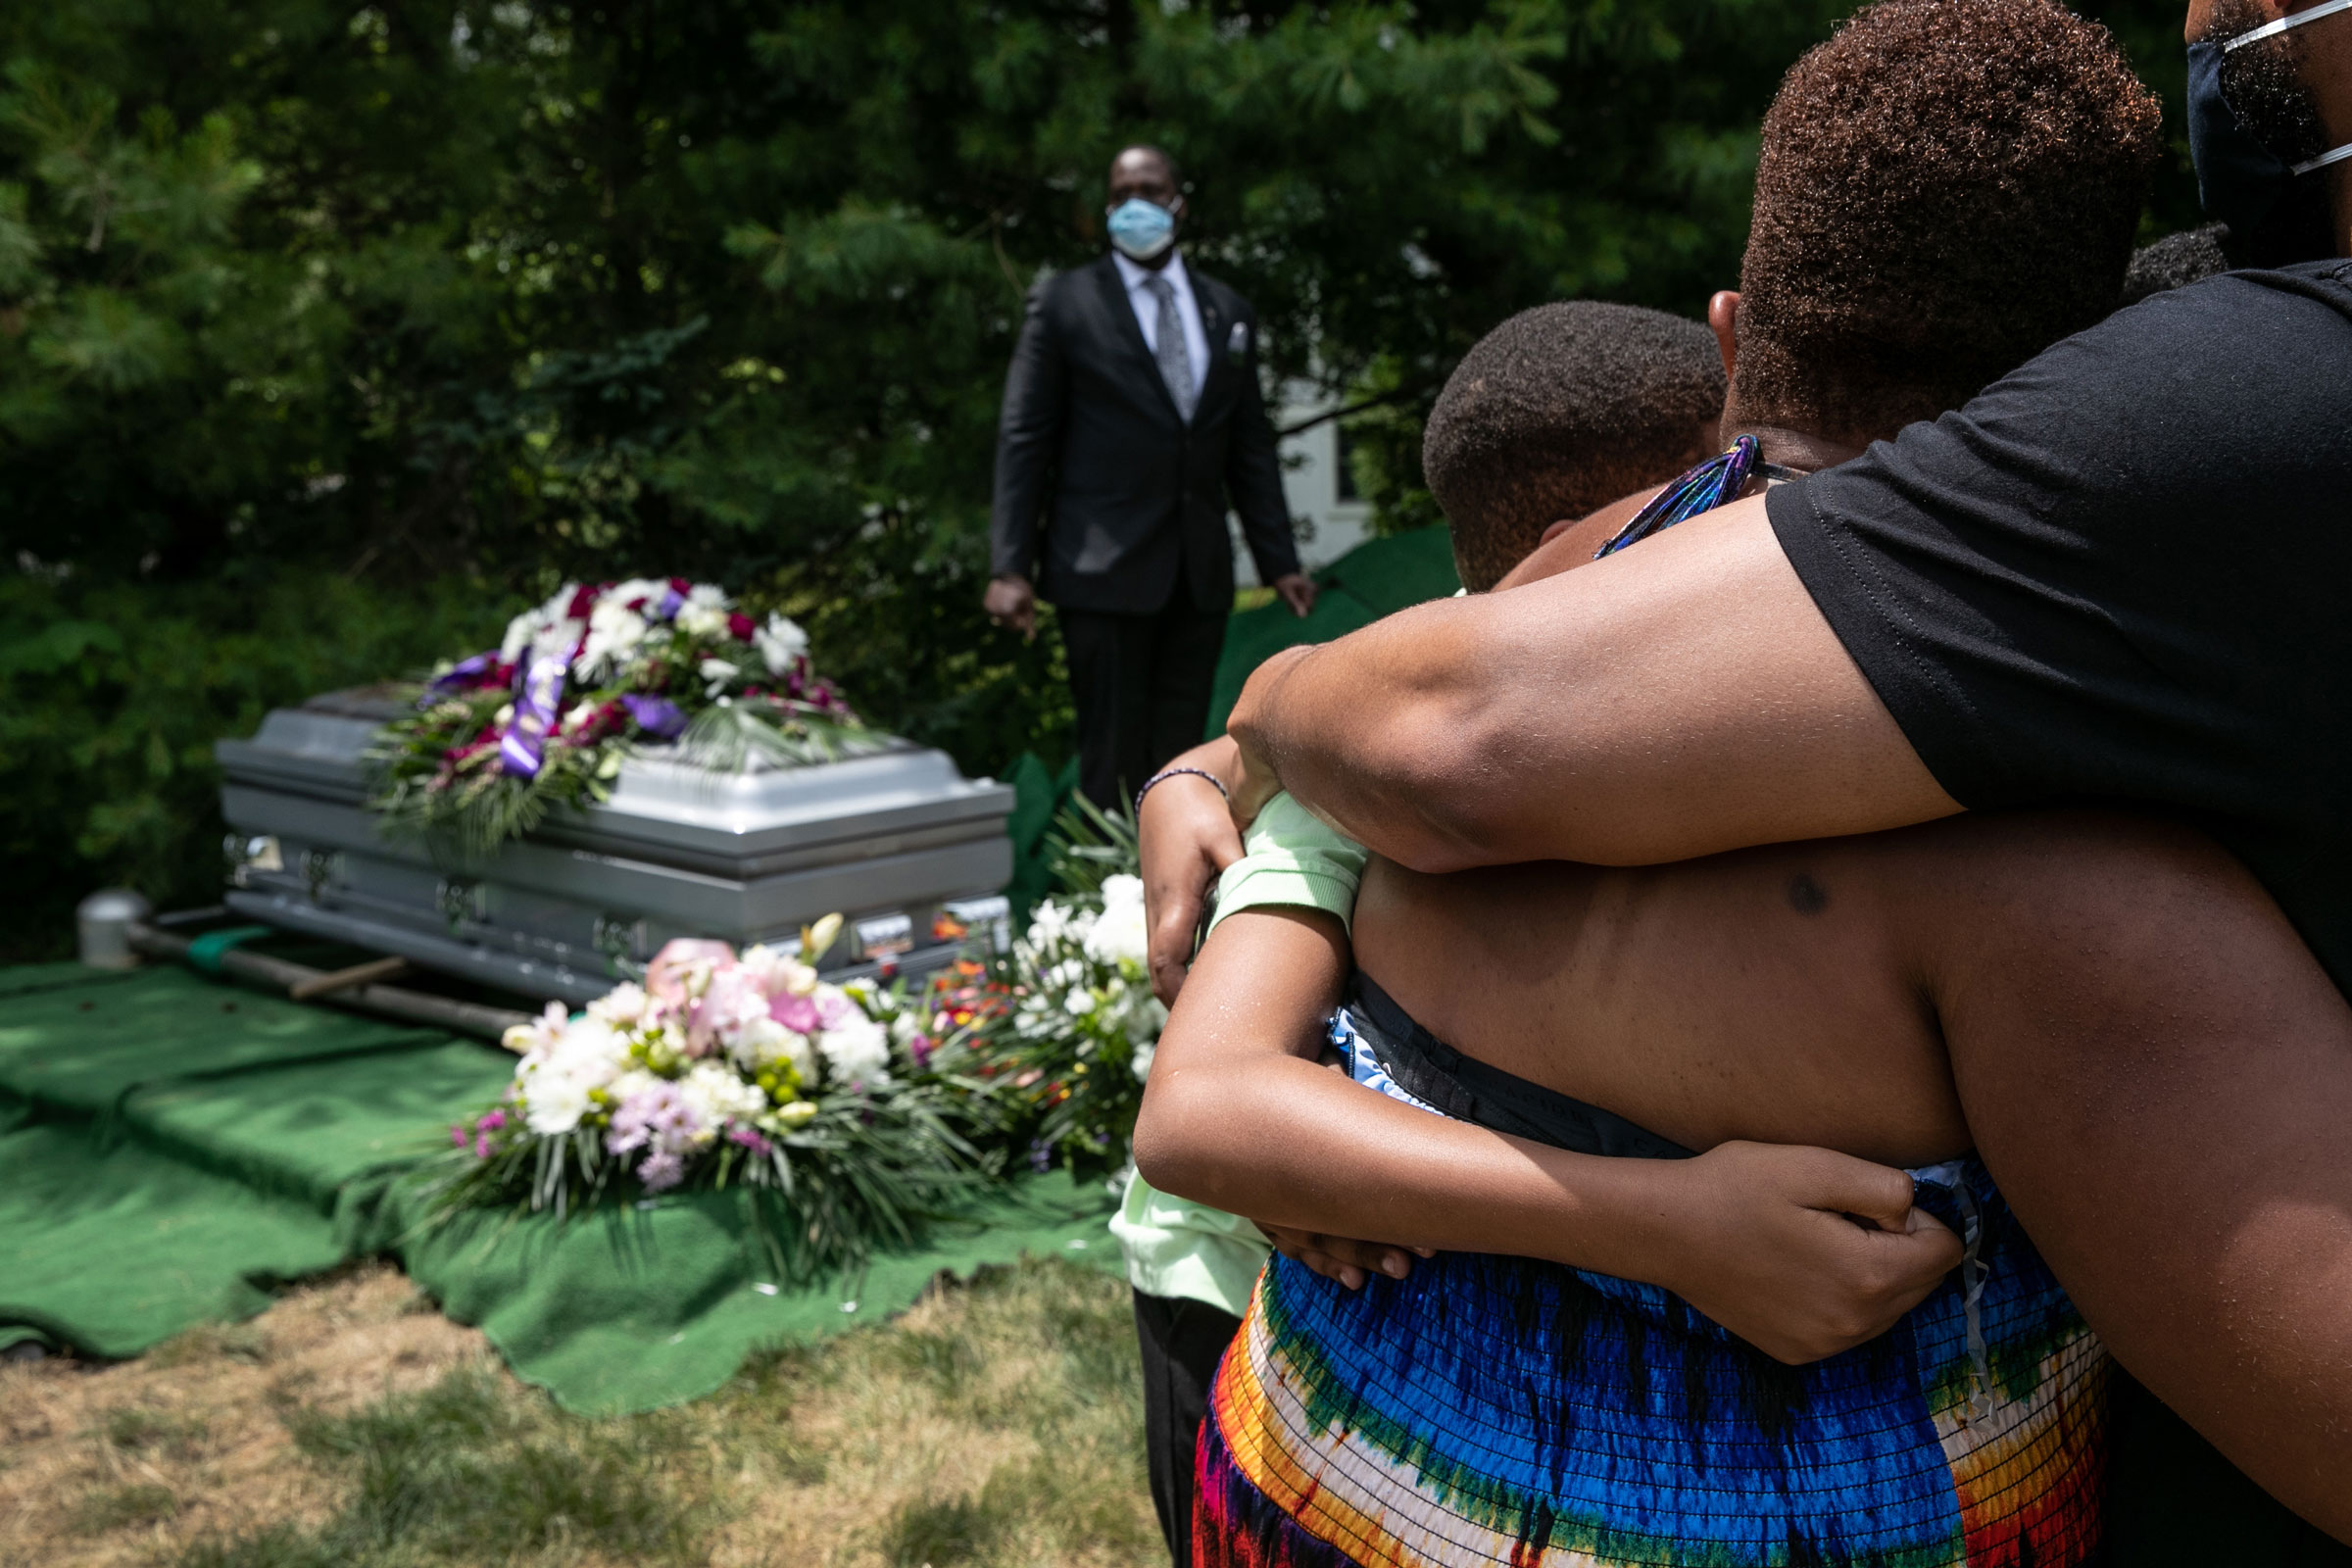 Family members and friends mourn the death of Conrad Coleman Jr. at his burial service in Rye, New York, on July 3, 2020. (John Moore—Getty Images)